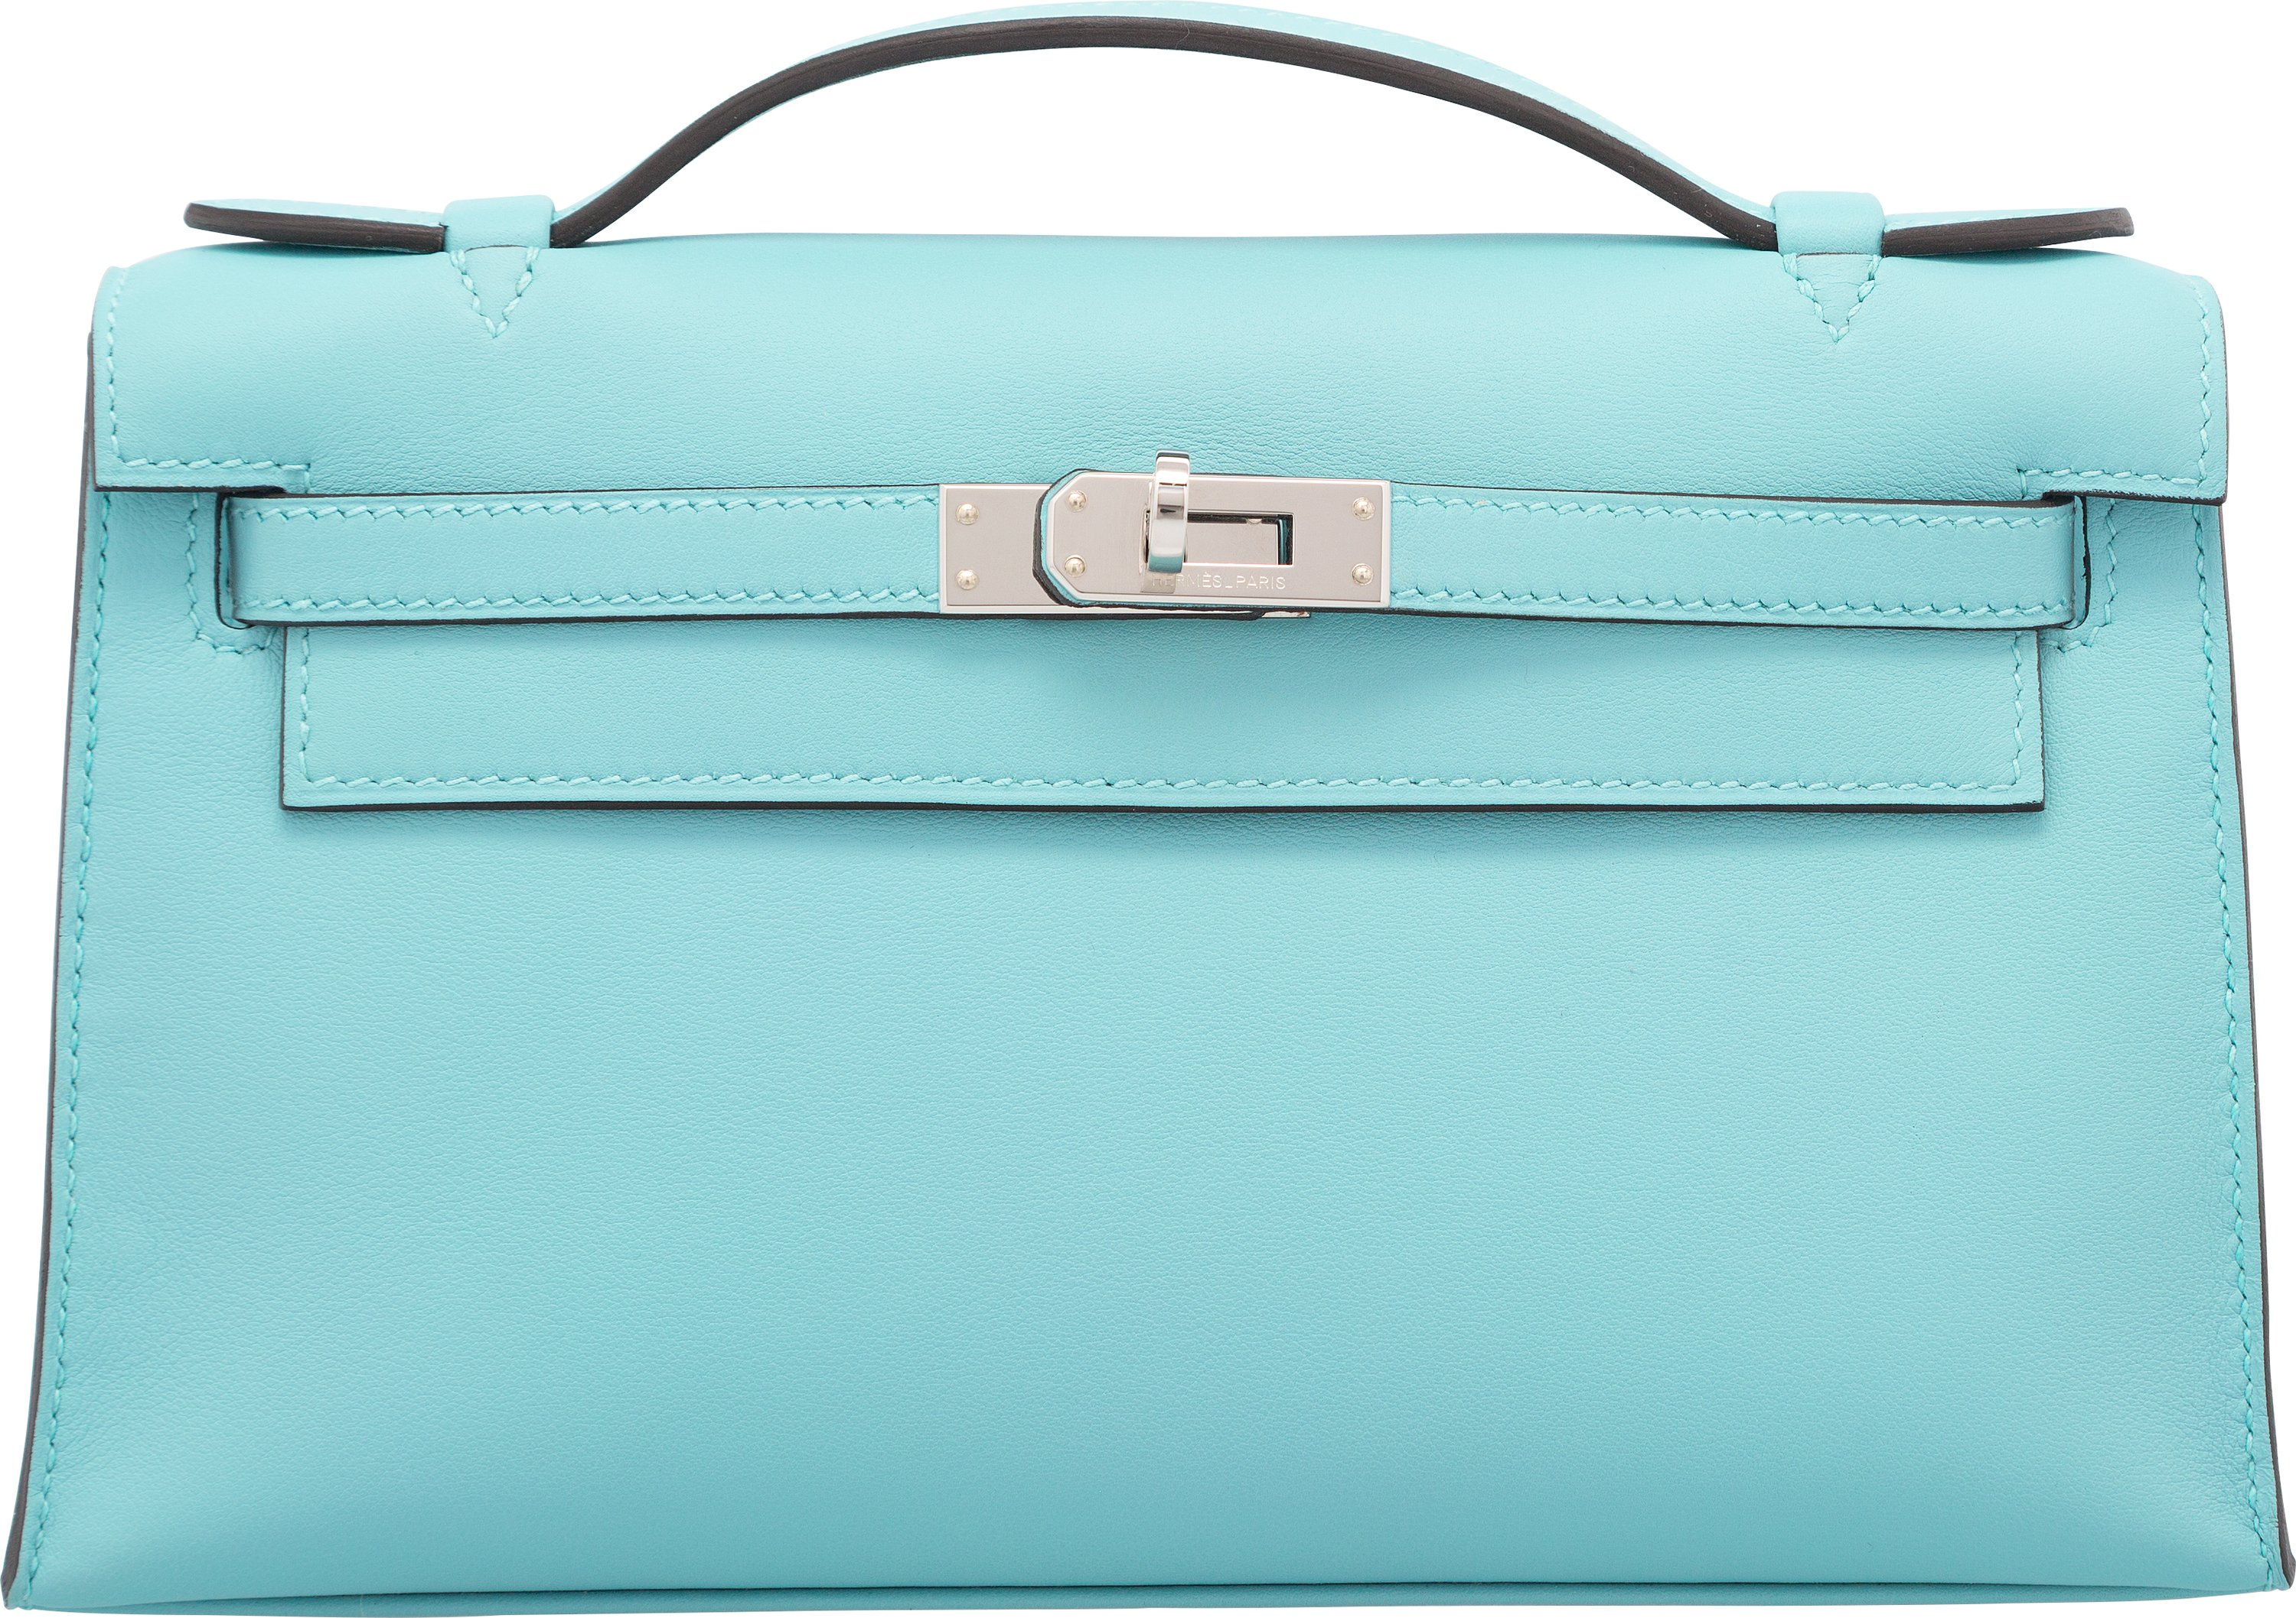 Hermes Blue Atoll Swift Leather Kelly Pochette Bag with Palladium